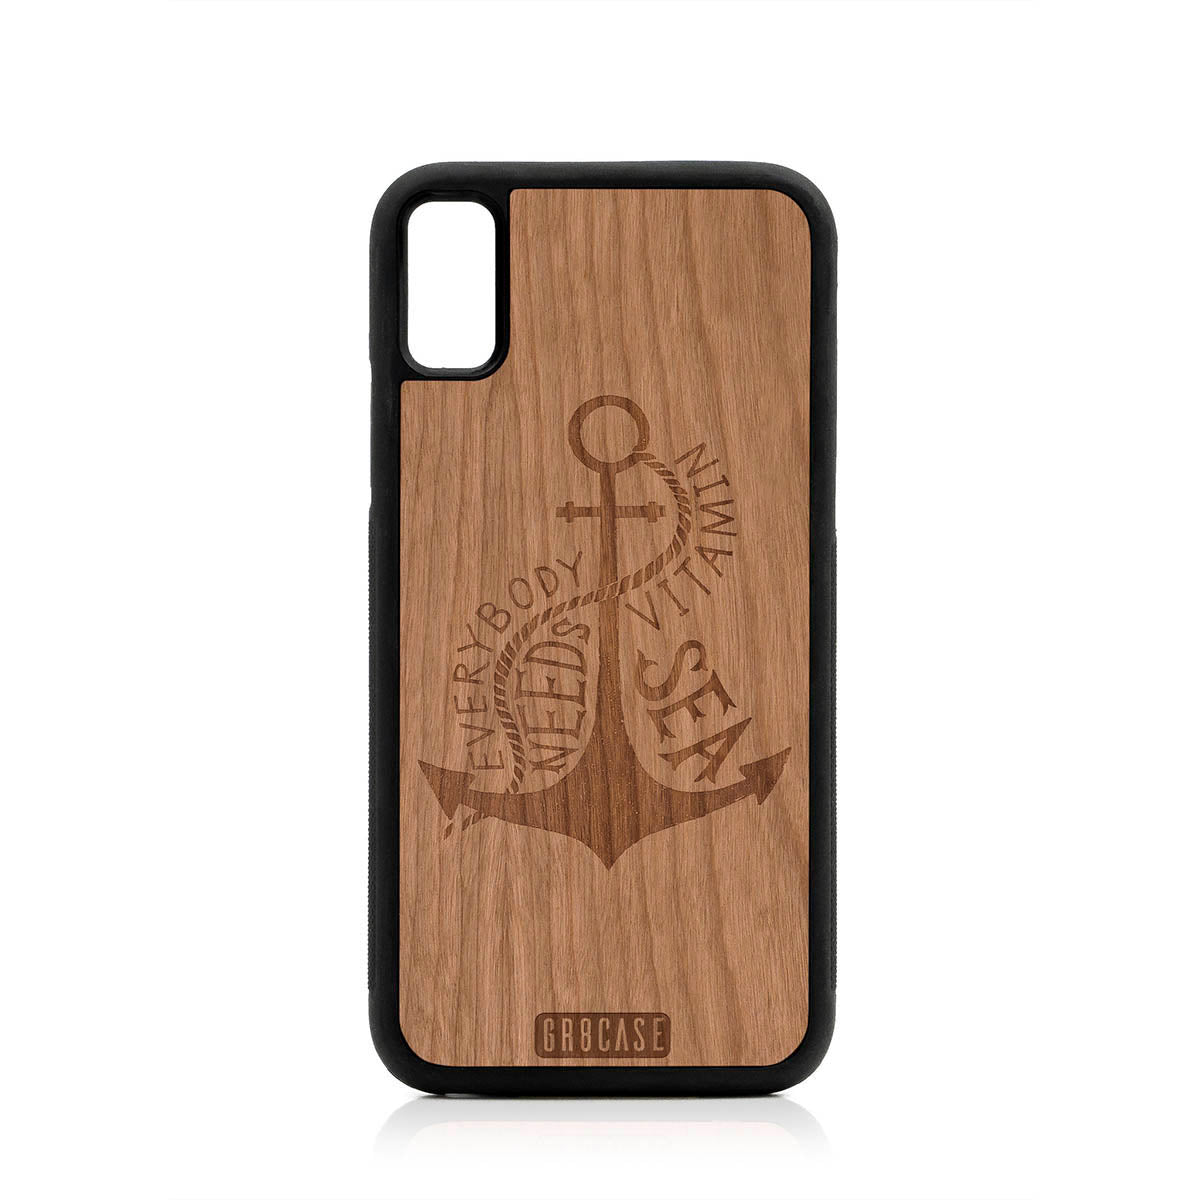 Everybody Needs Vitamin Sea (Anchor) Design Wood Case For iPhone XR by GR8CASE